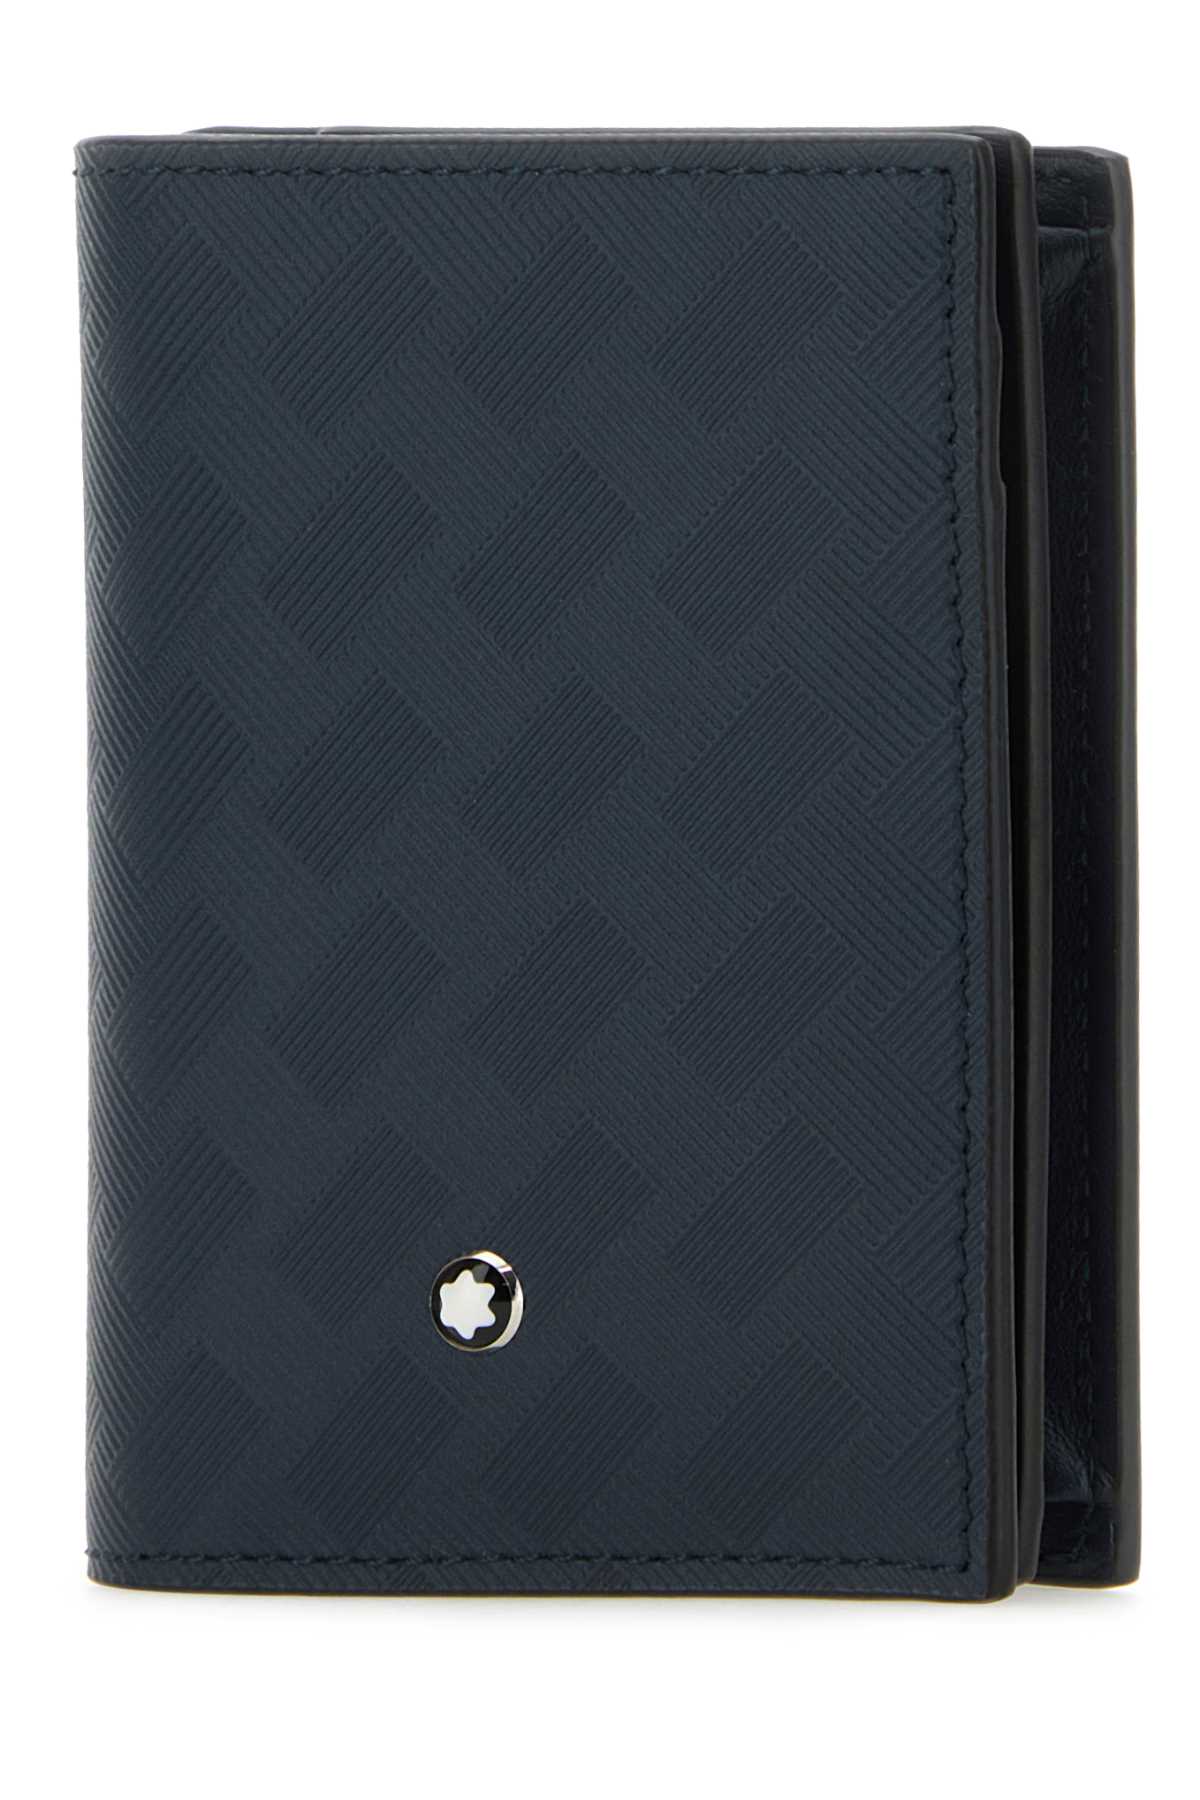 Montblanc Blue Leather Cardholder In Inkblue